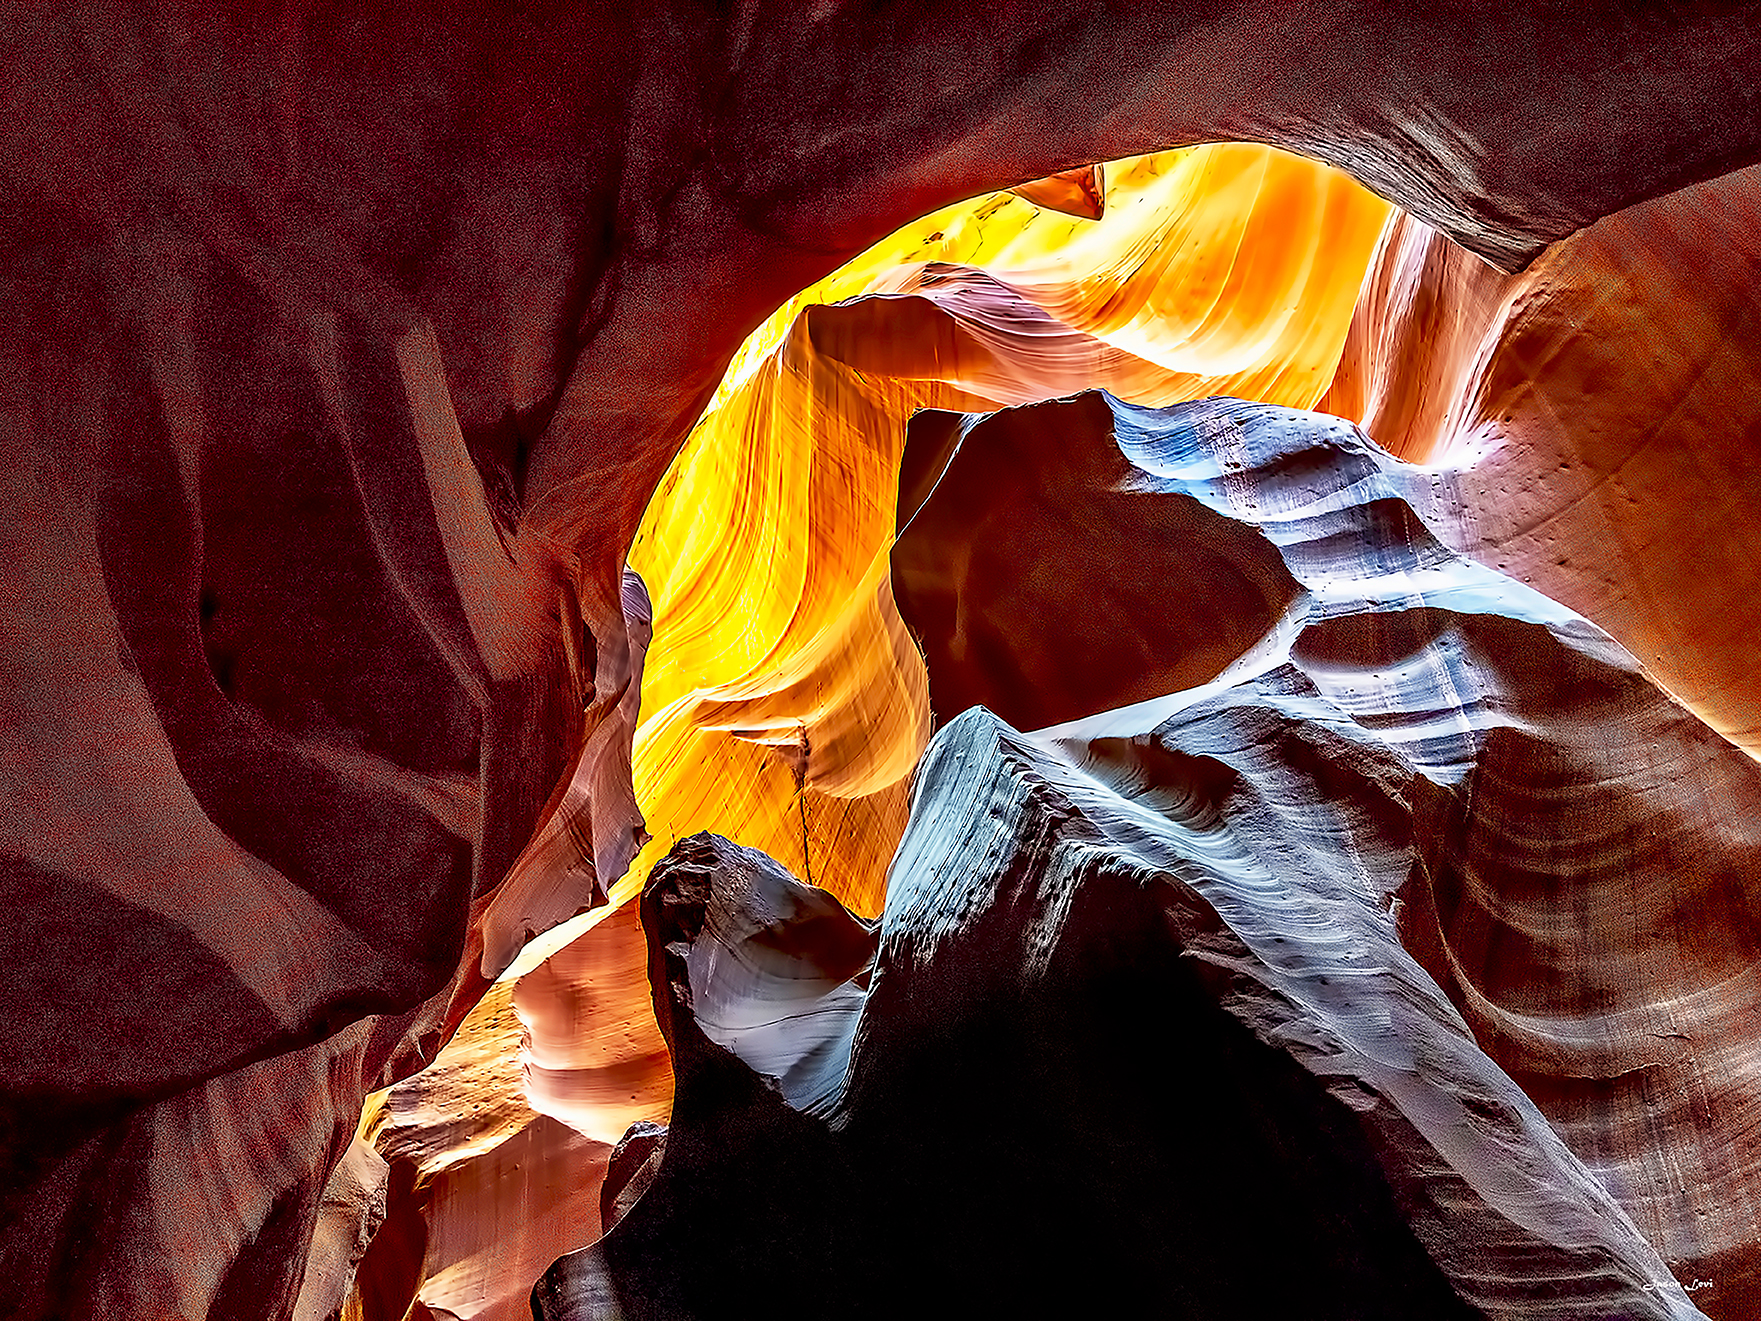 THE CRYPT IN ANTELOPE CANYON